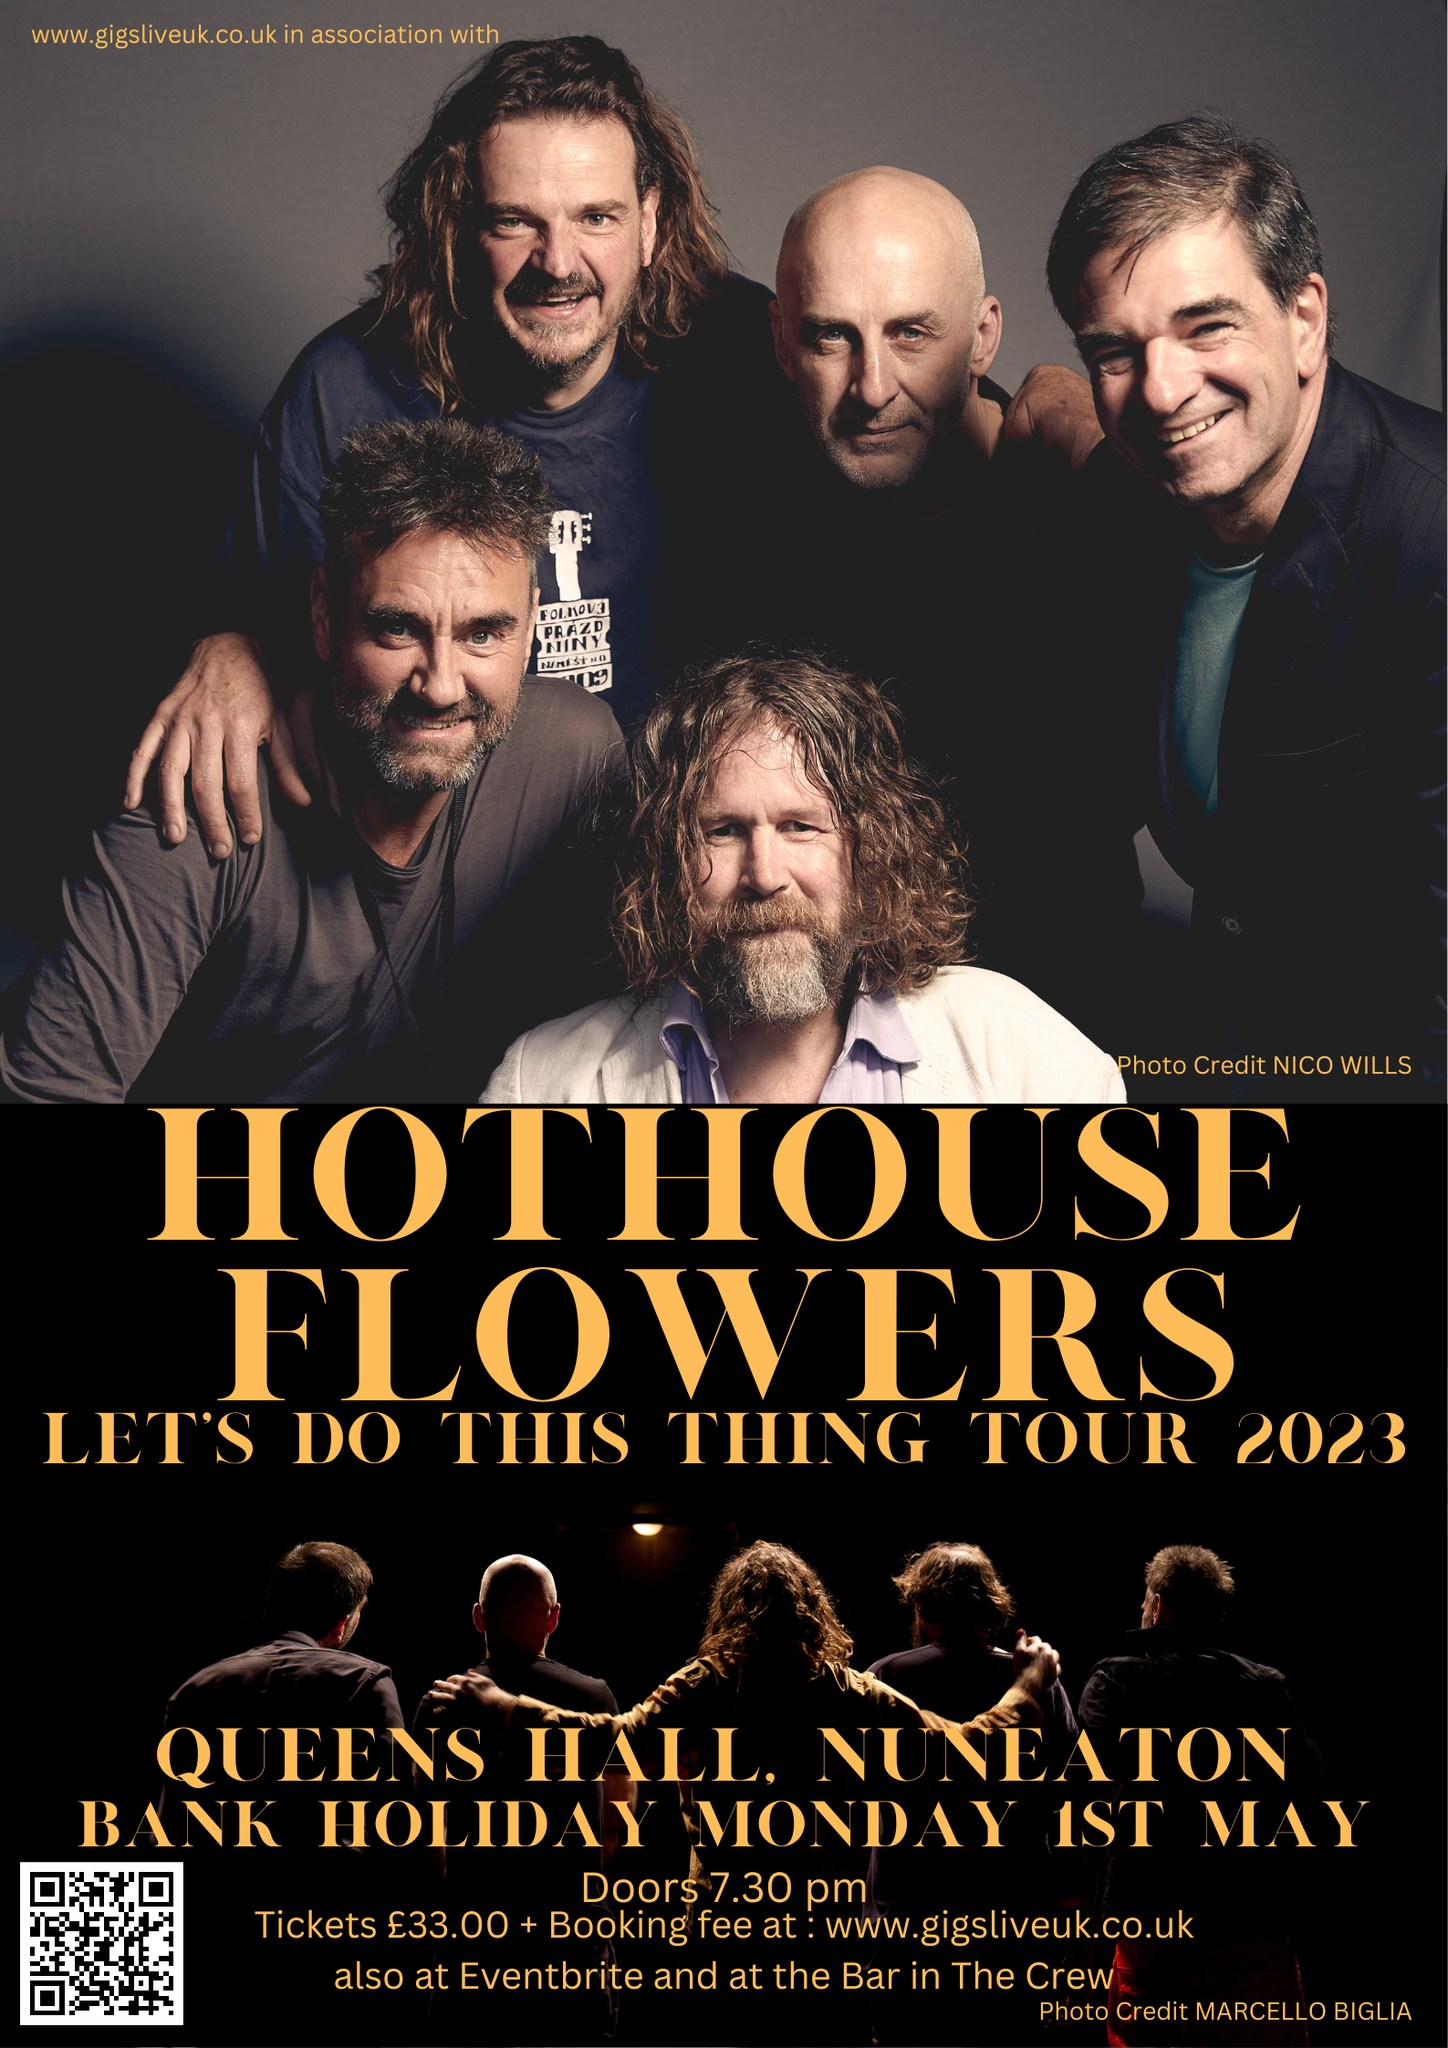 hothouse flowers tour 2023 reviews